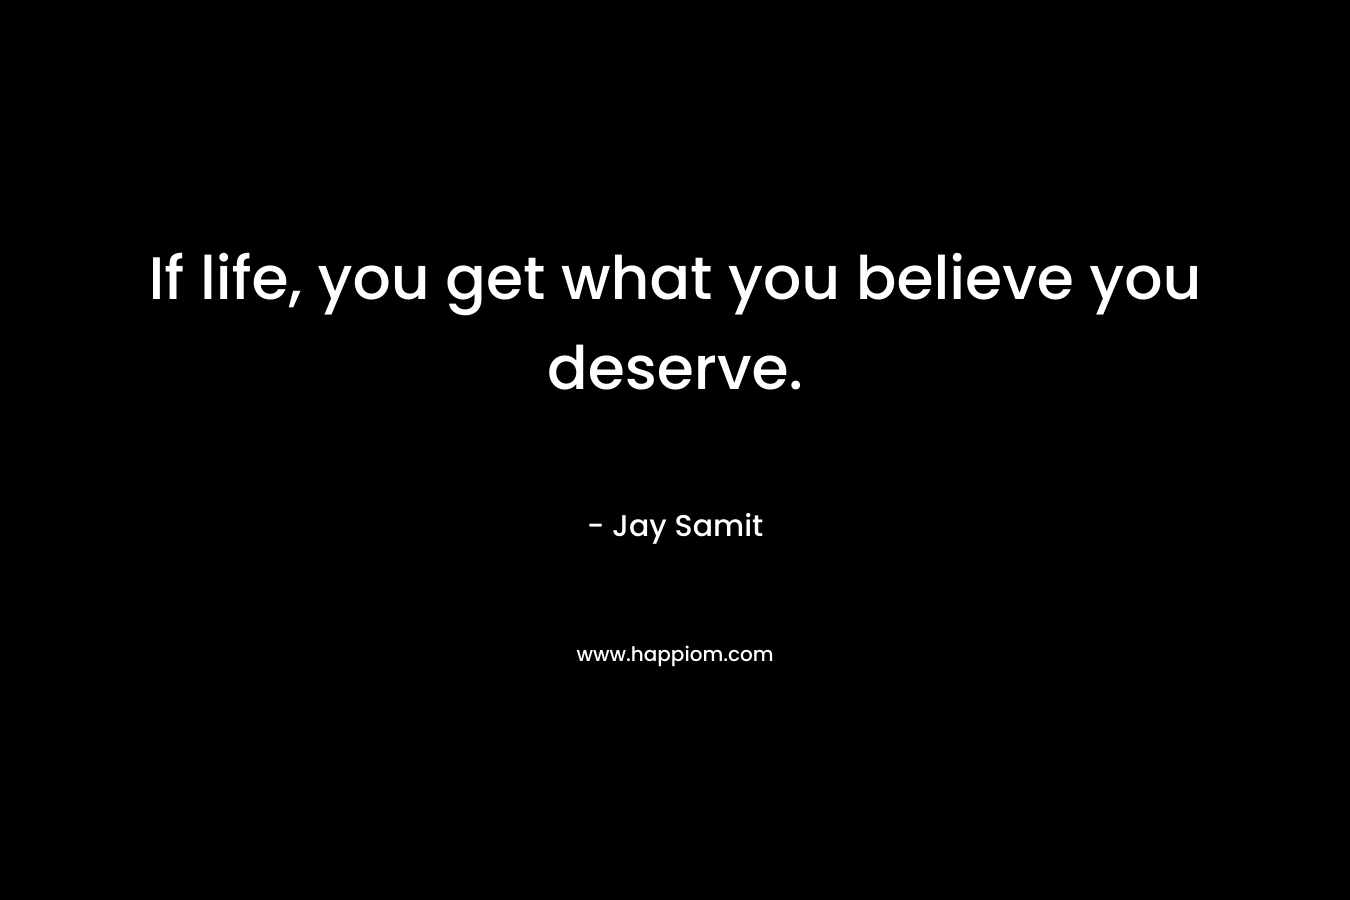 If life, you get what you believe you deserve.